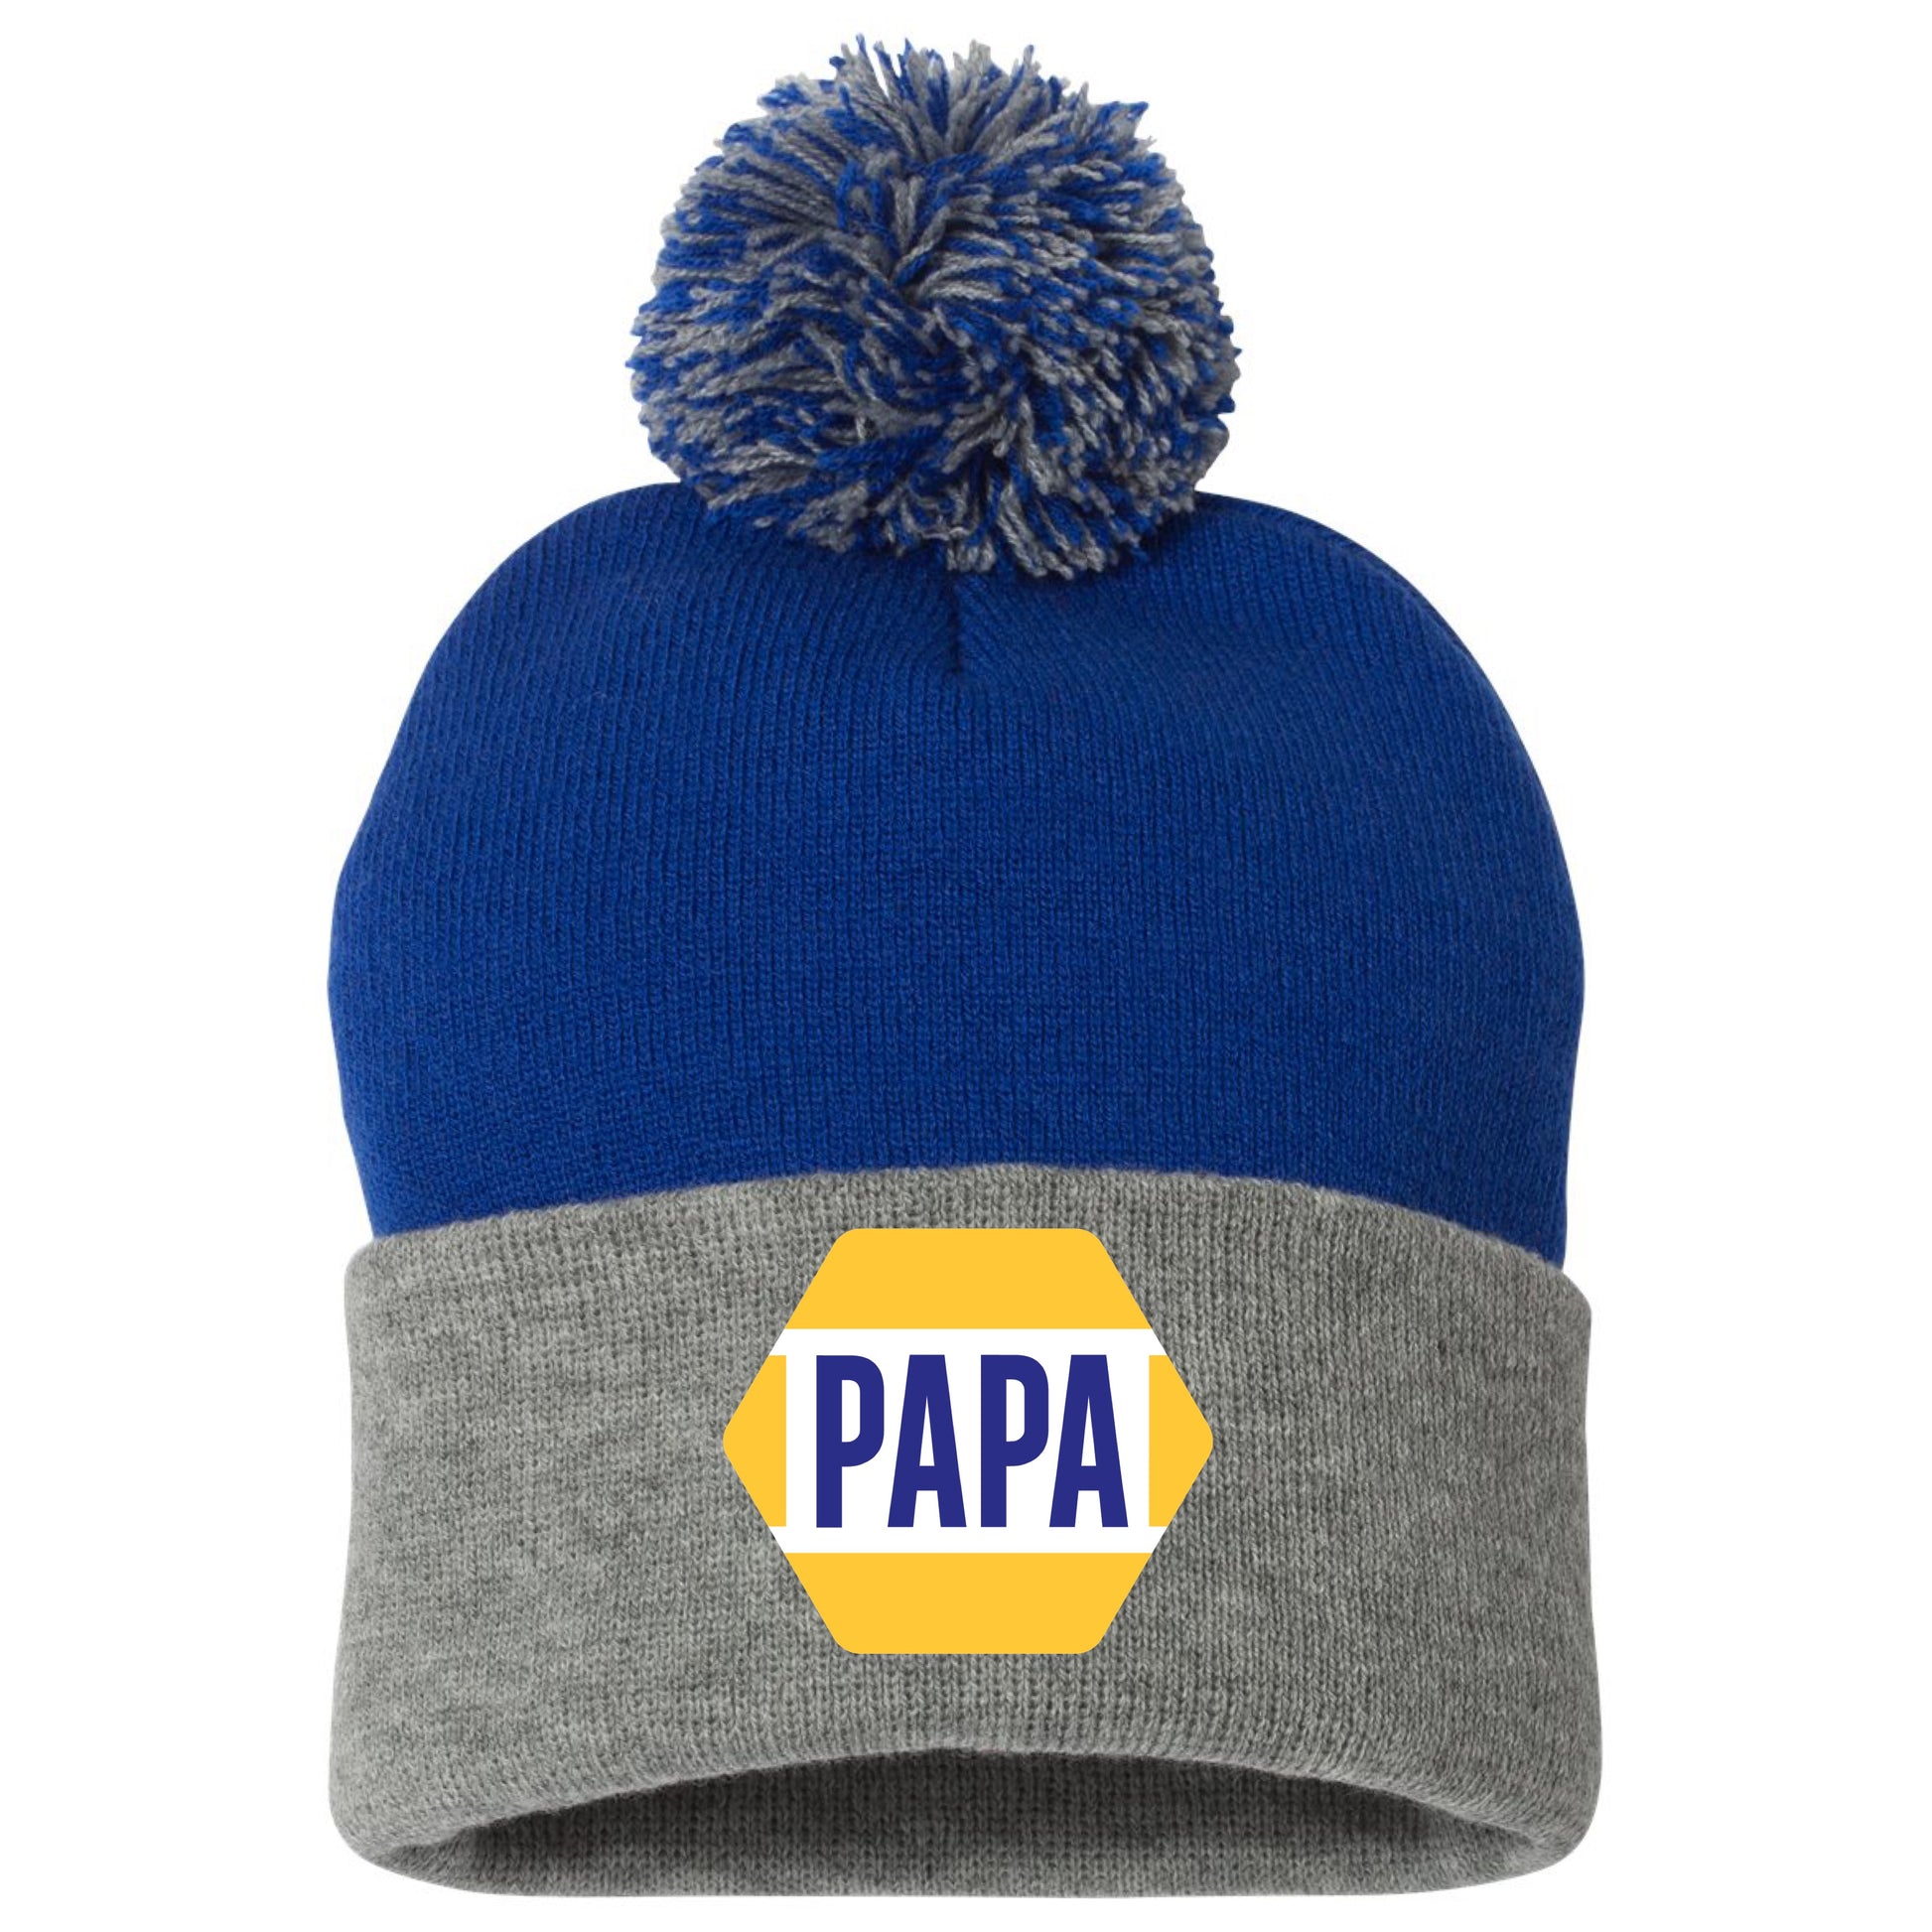 PAPA Know How 3D 12 in Knit Pom-Pom Top Beanie- Royal/ Grey - Ten Gallon Hat Co.